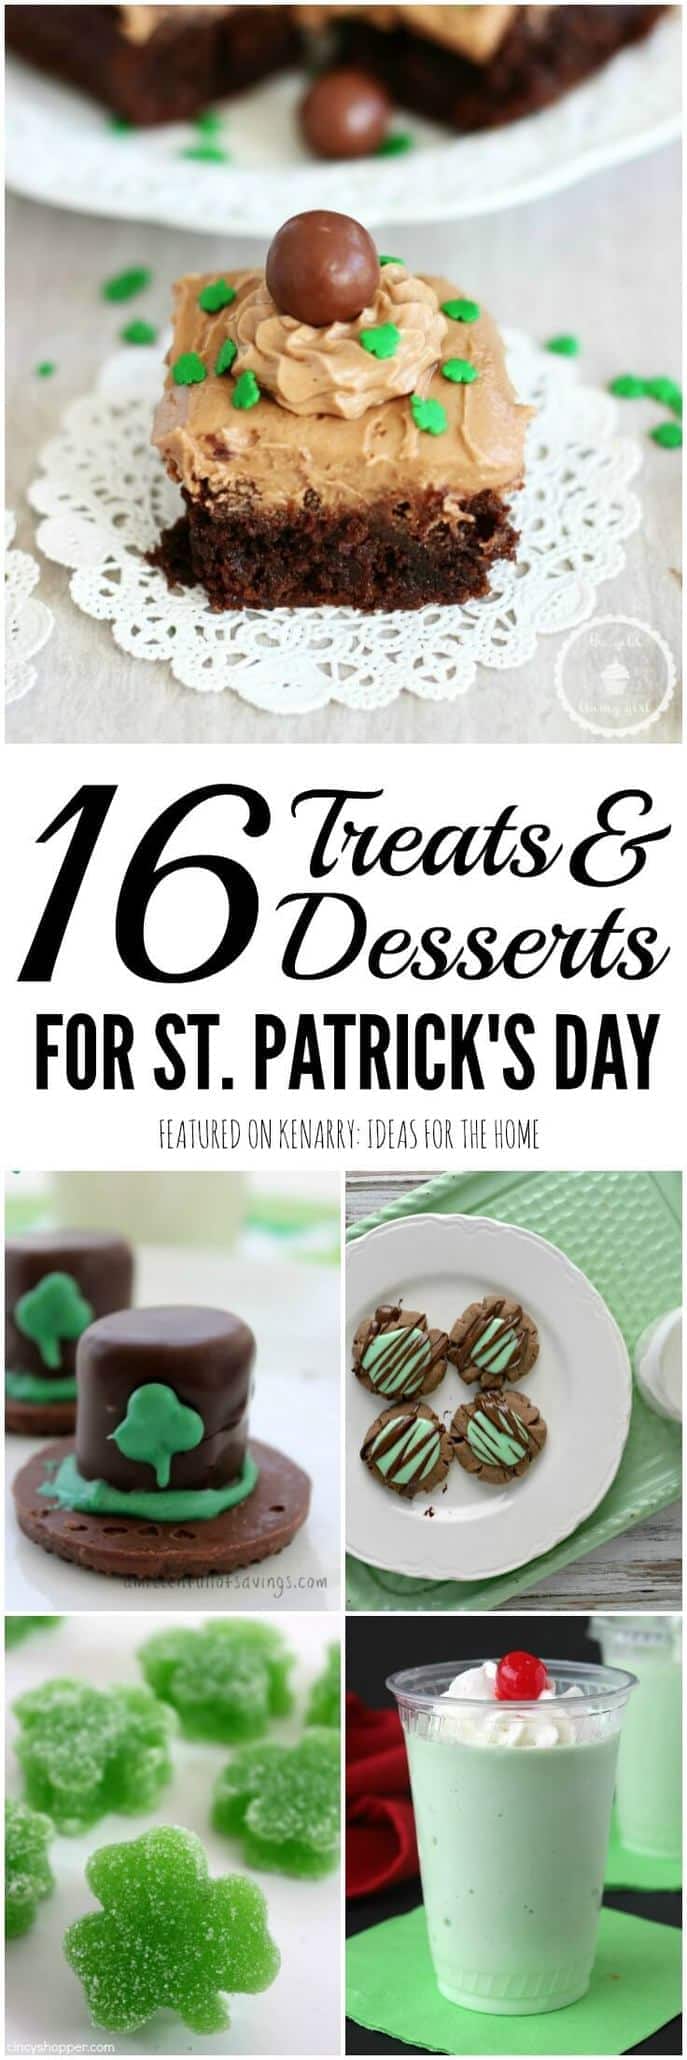 Celebrate on March 17 with any of these 16 St. Patrick's Day Treats and Party Ideas including delicious desserts, drinks, snacks and other recipes.